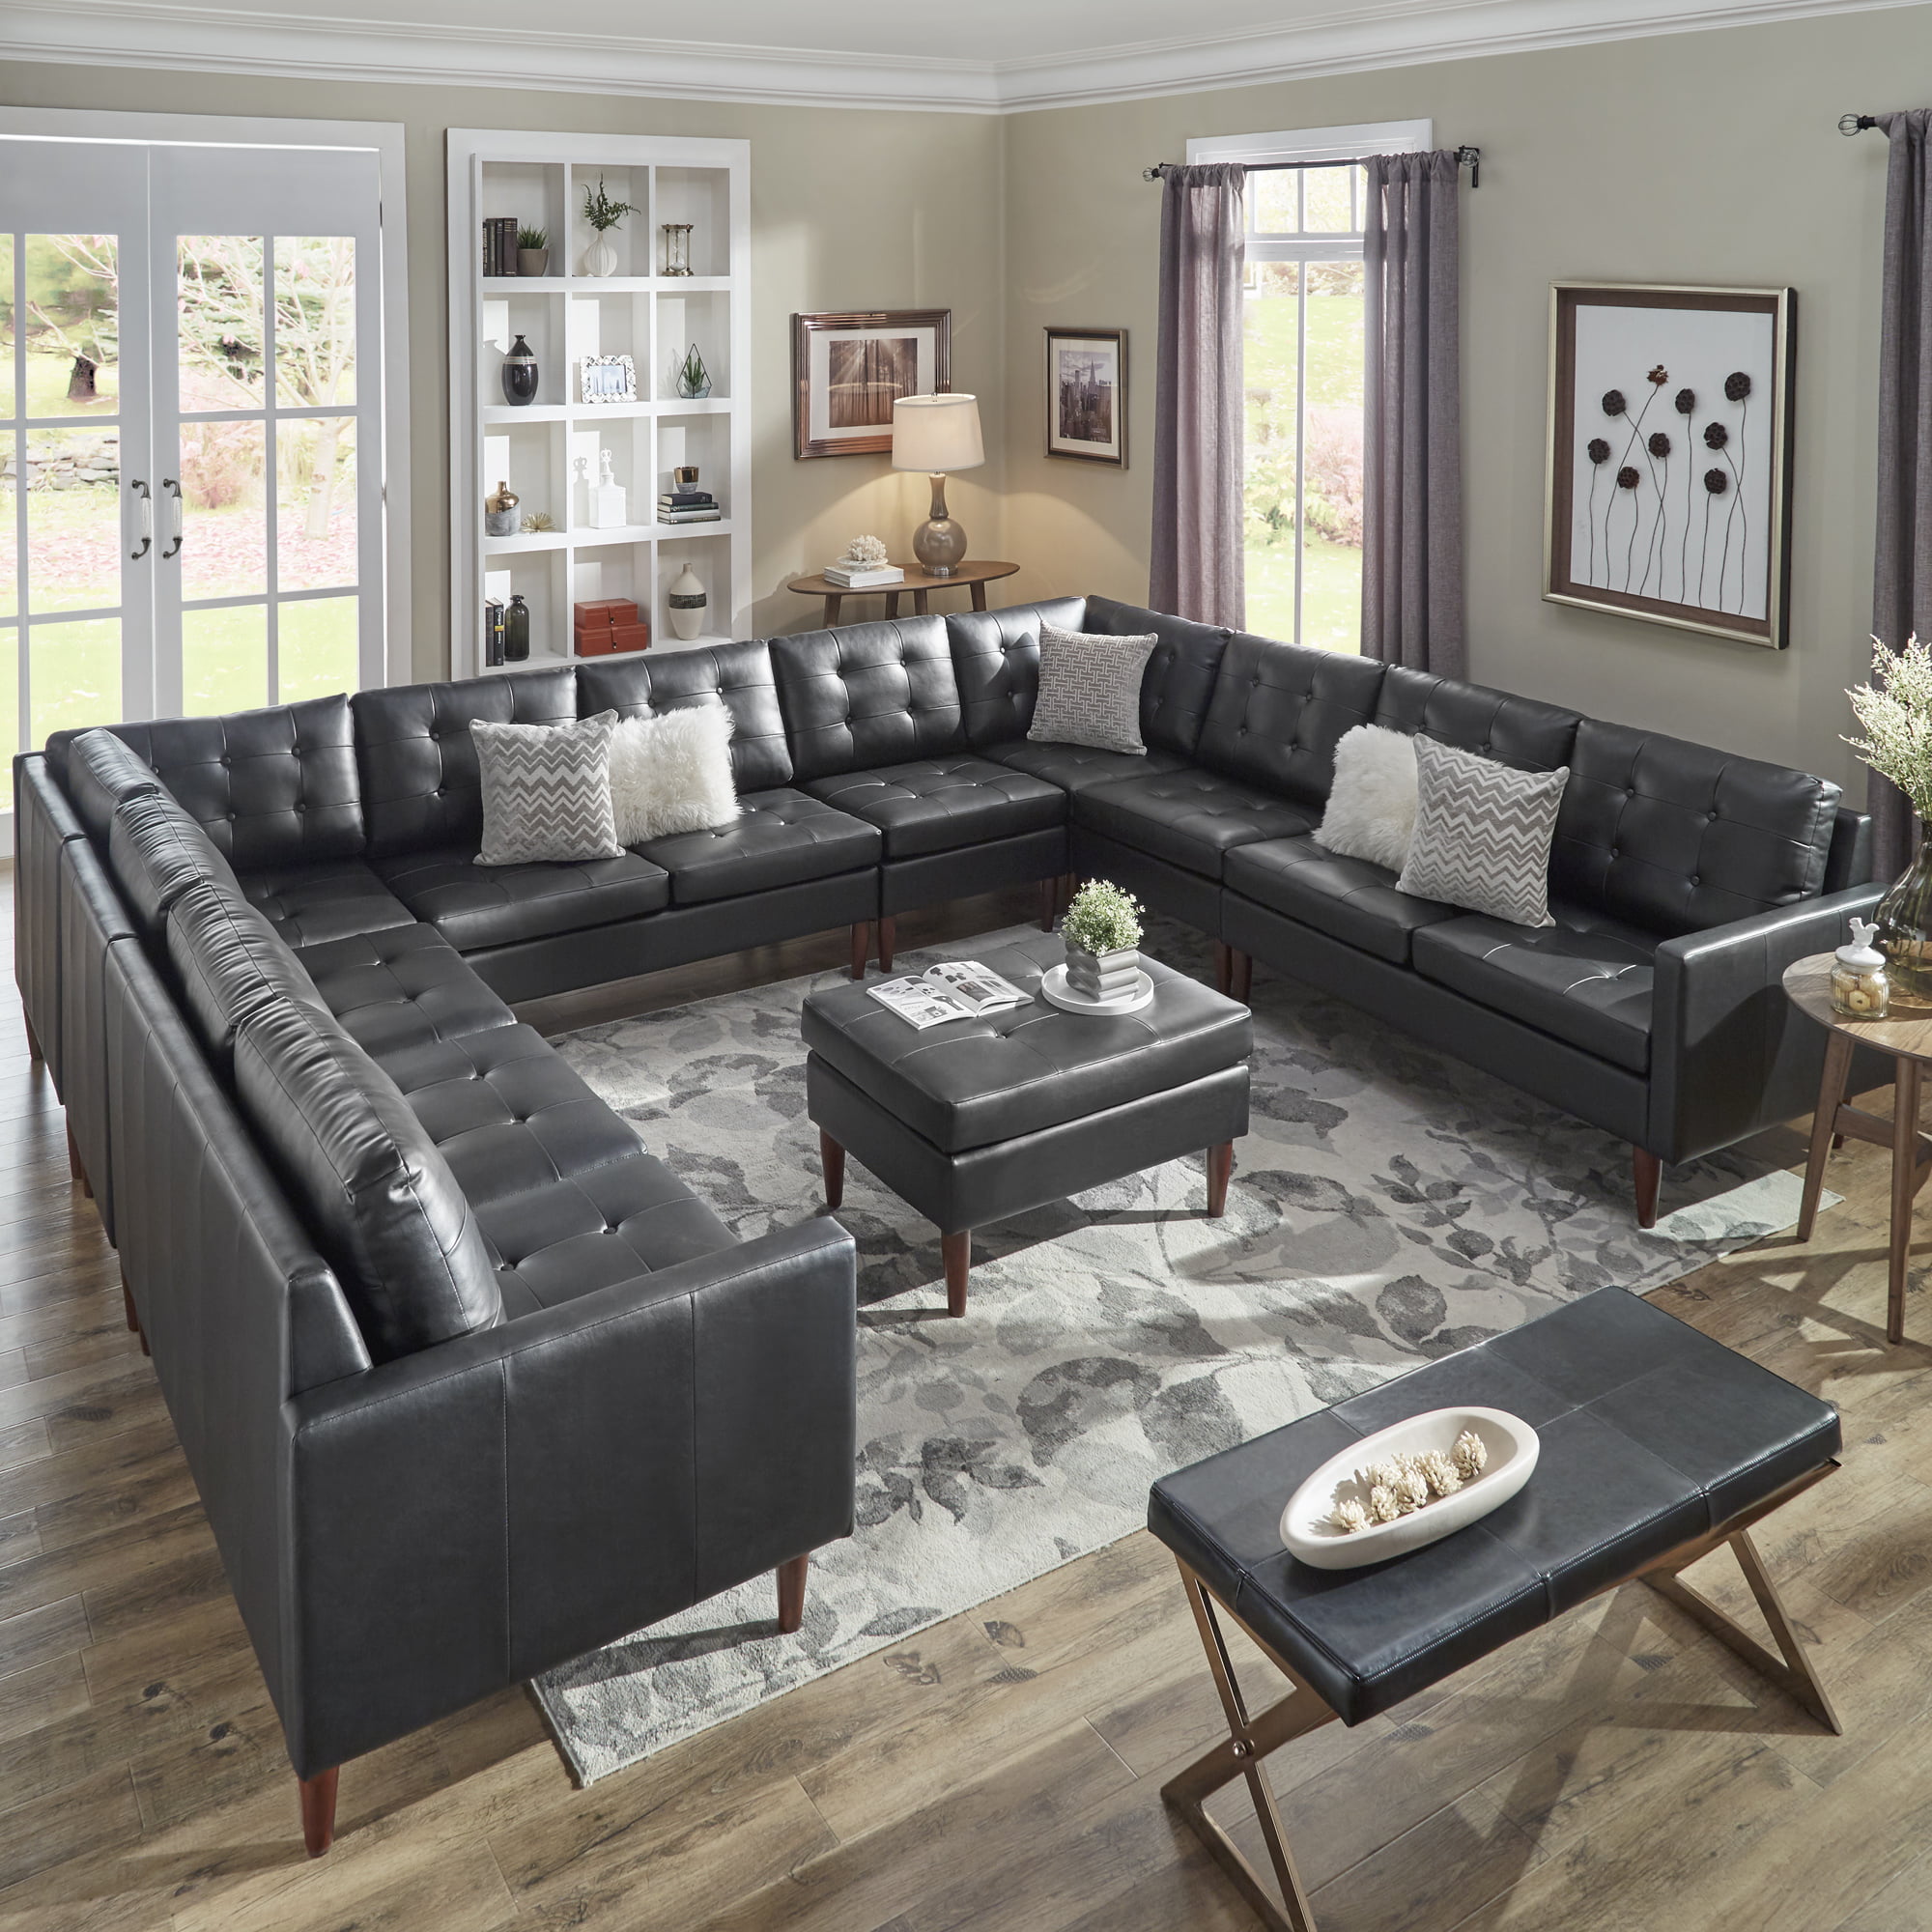 Weston Home Gilly On Tufted Black, Leather U Shaped Sectional